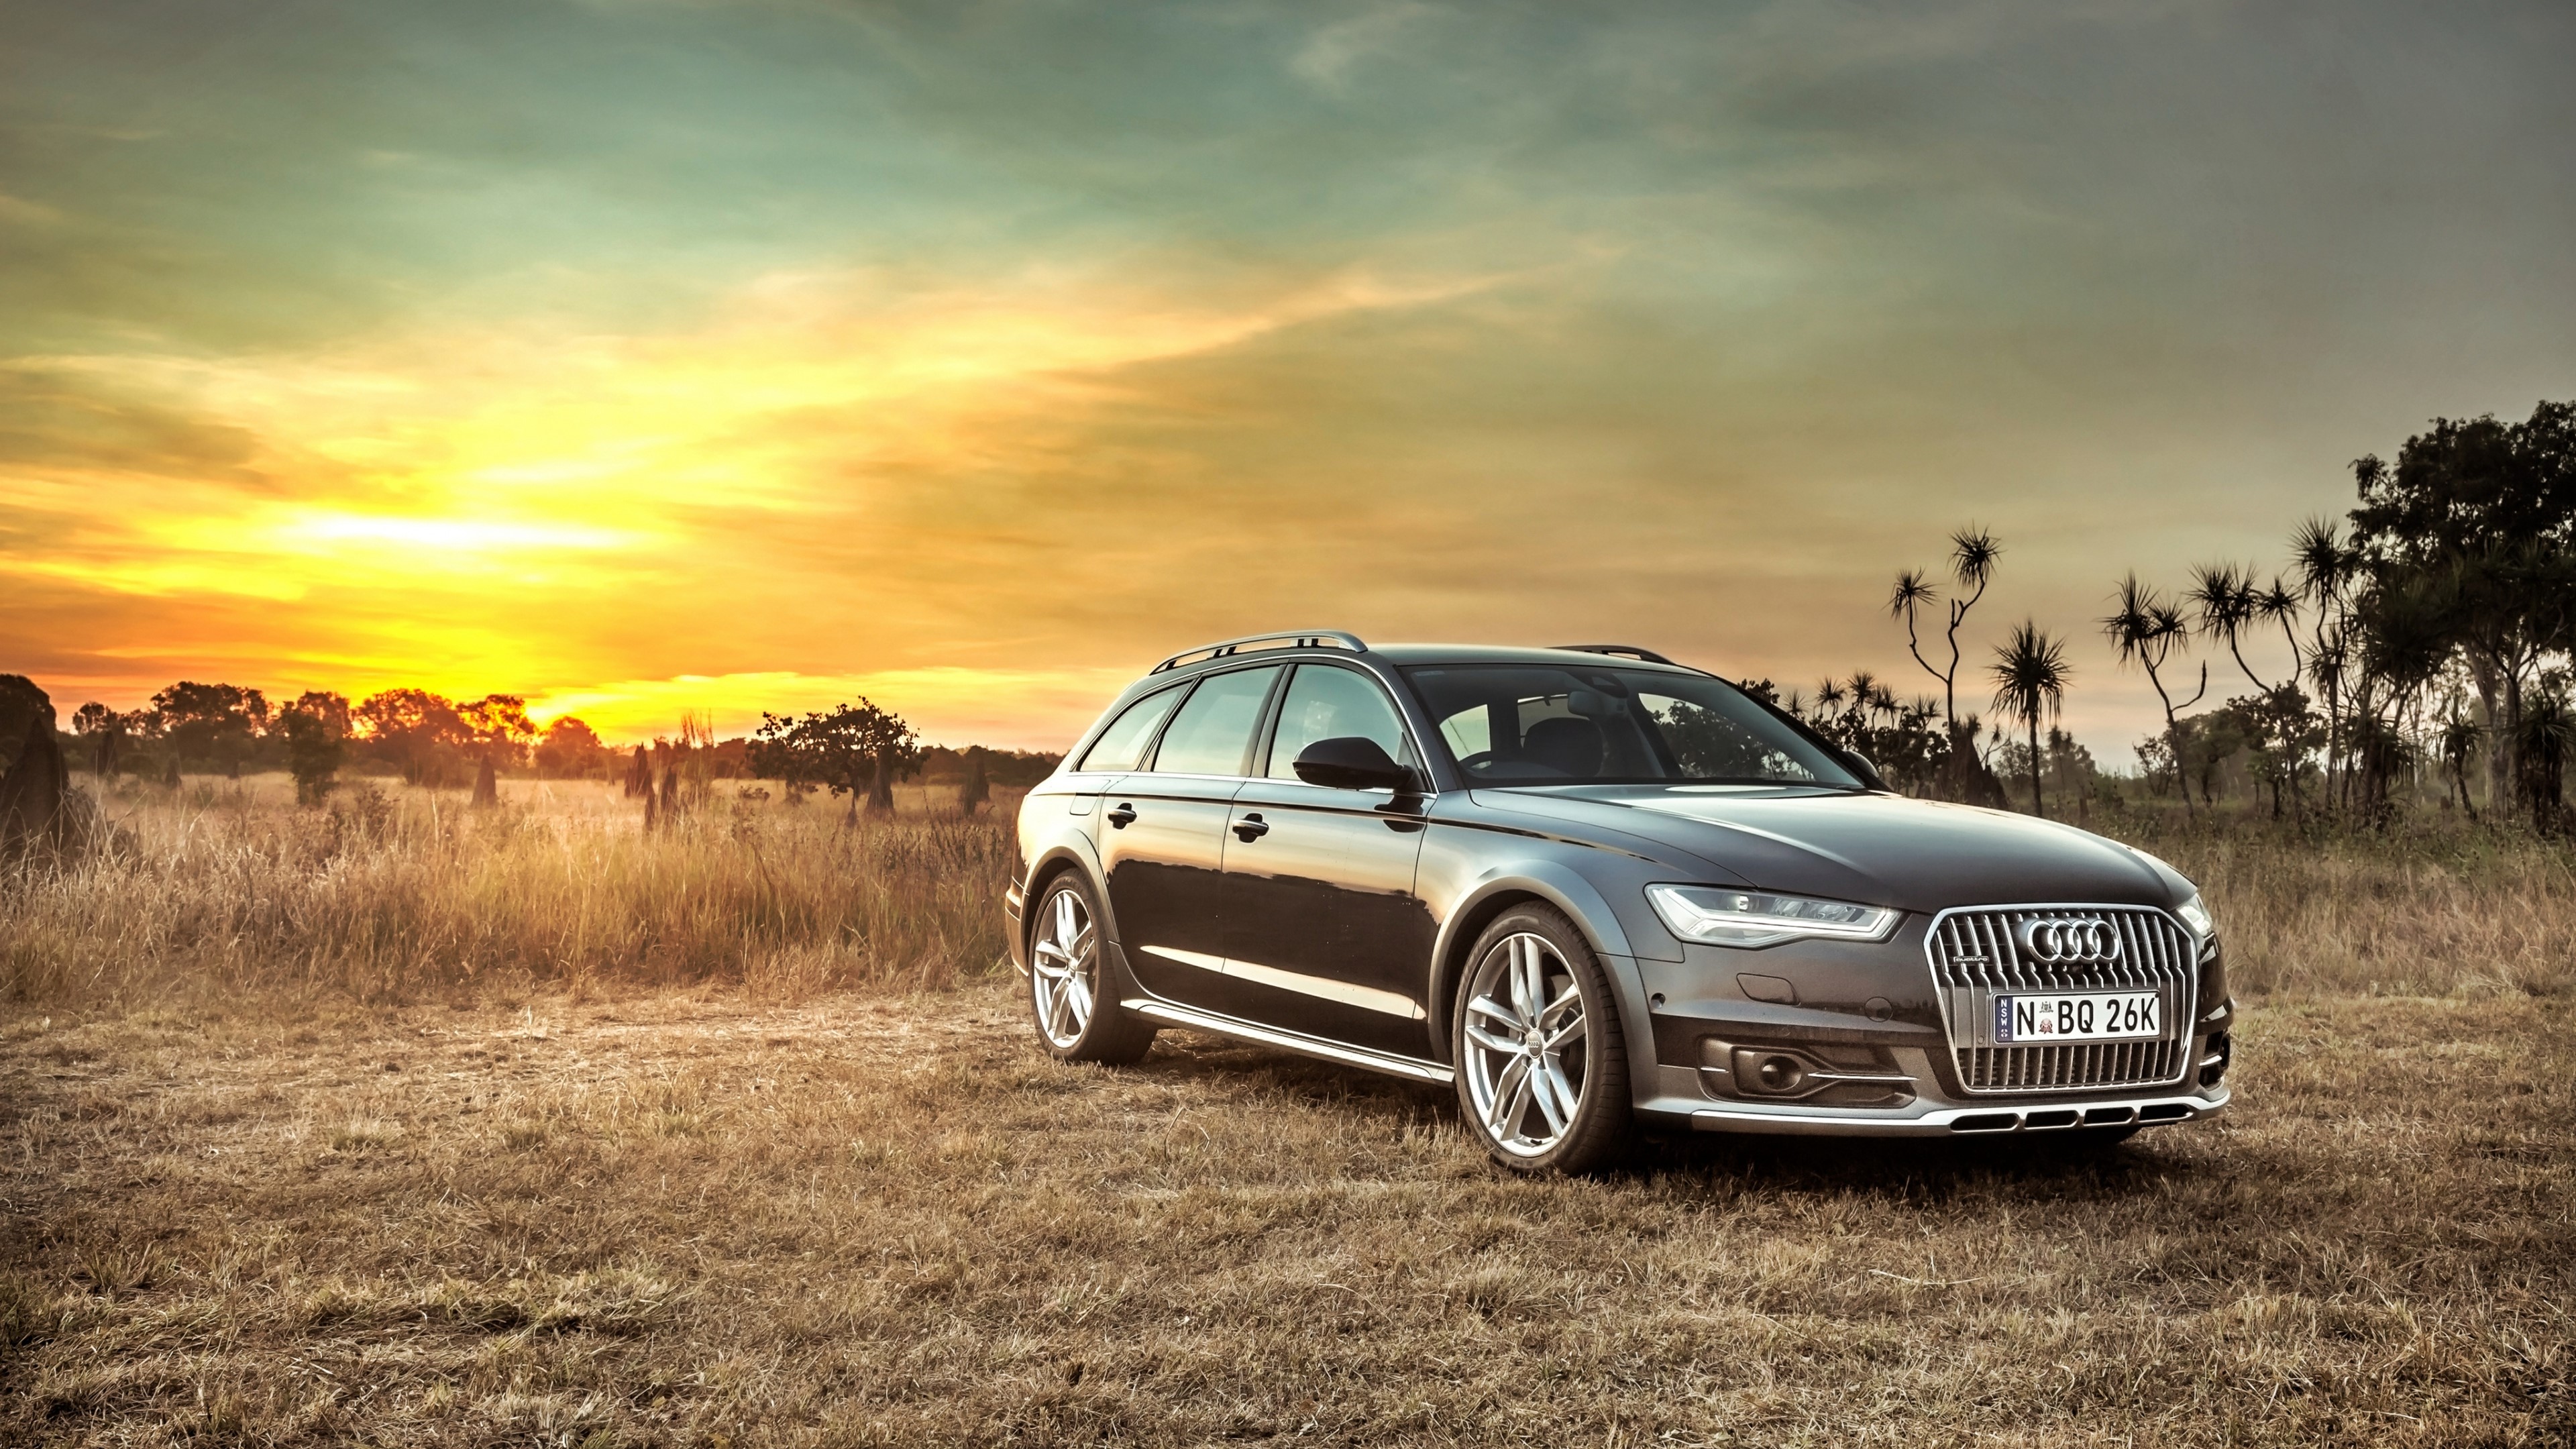 Vehicles Audi A6 Allroad HD Wallpaper | Background Image